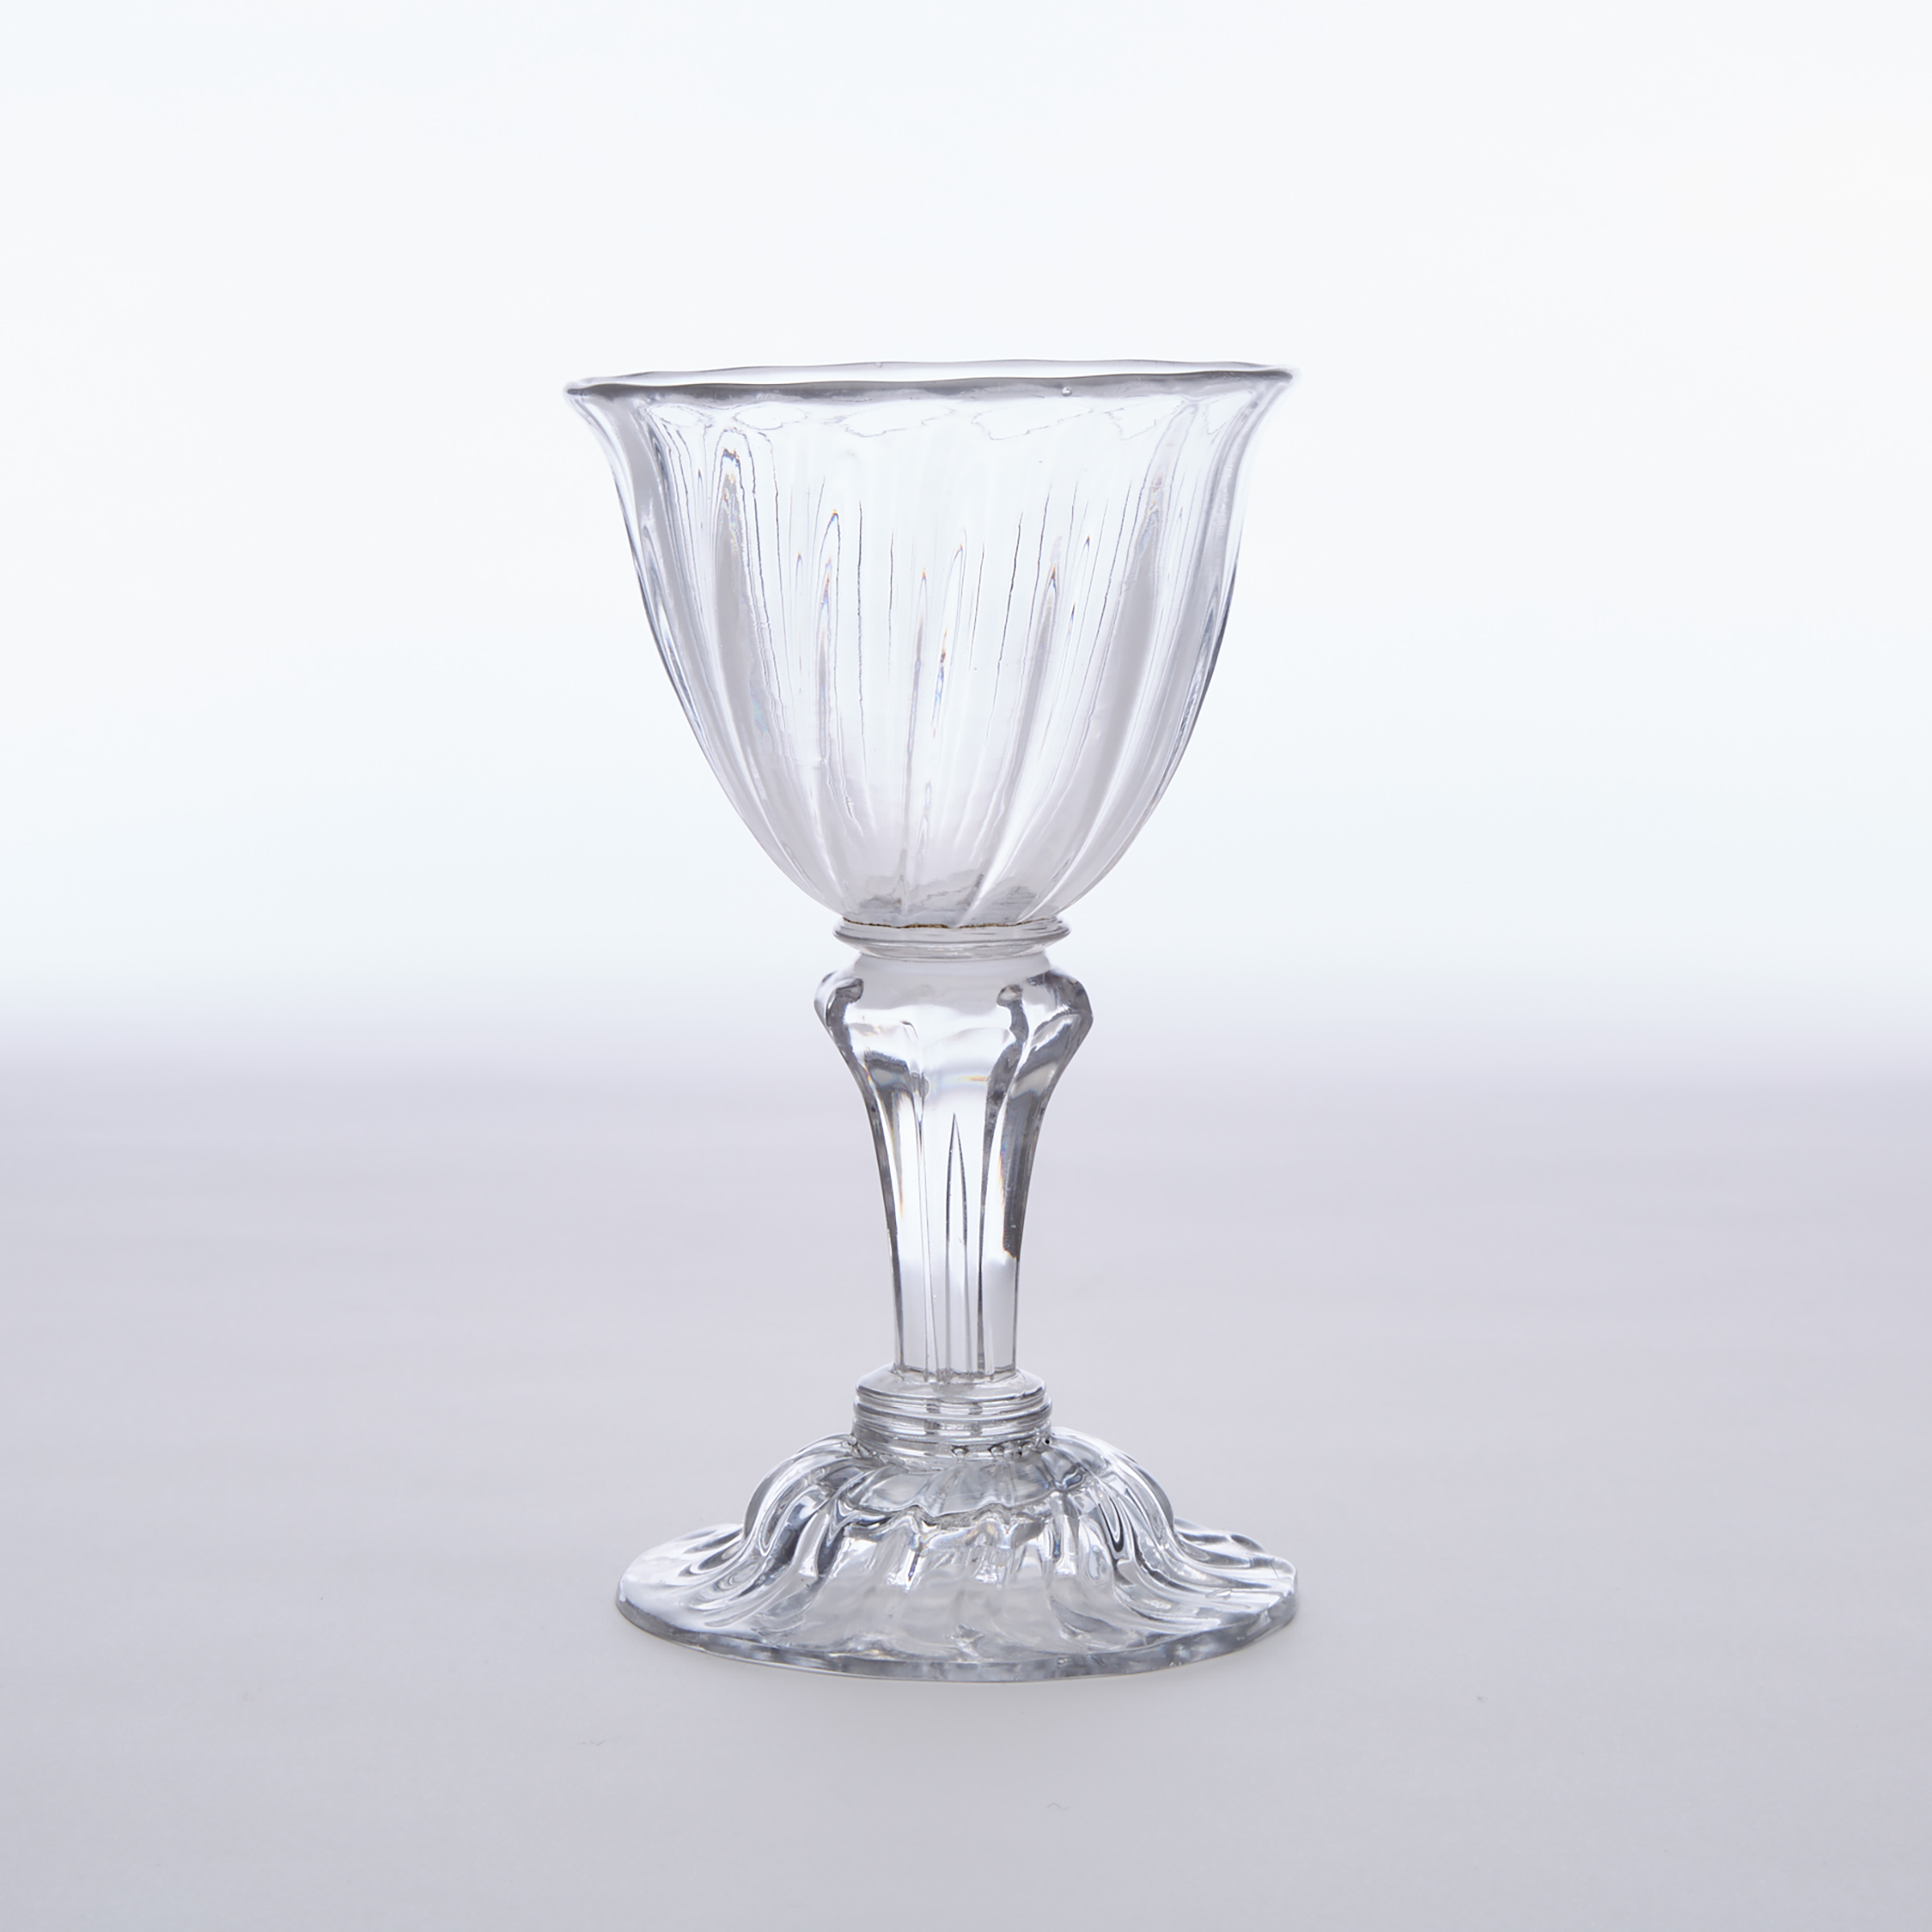 English Moulded Pedestal Stemmed Sweetmeat Glass, mid-18th century